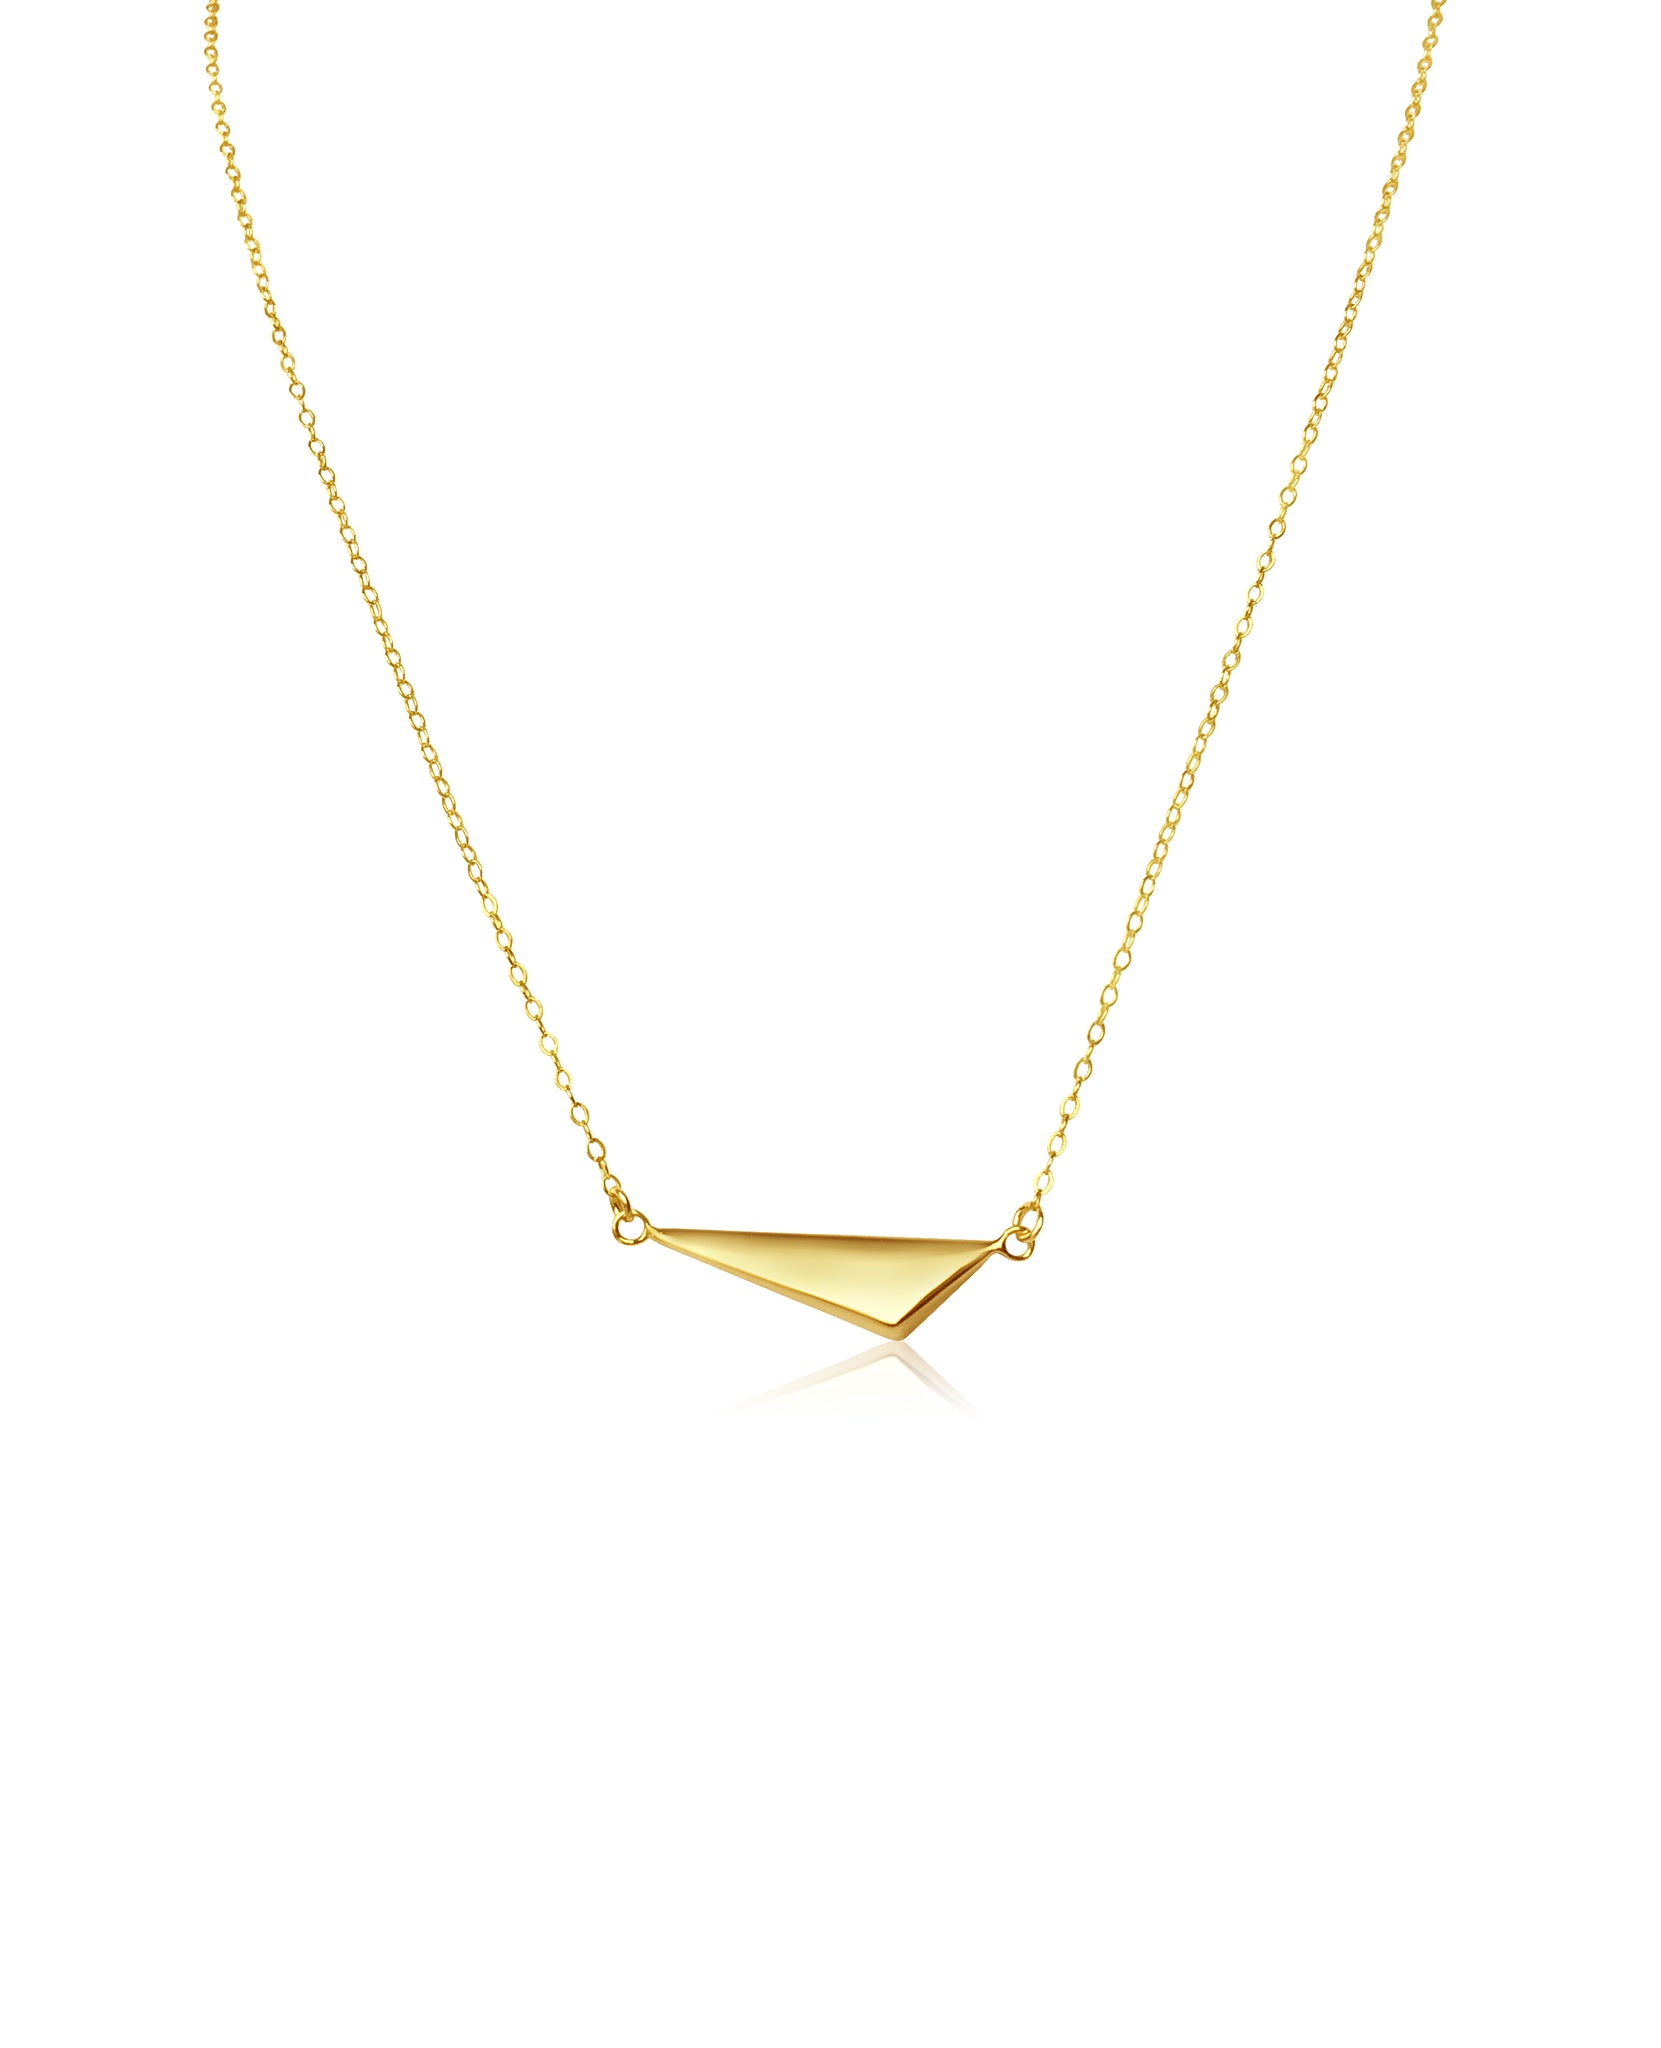 Geometric Gold Filled Necklace